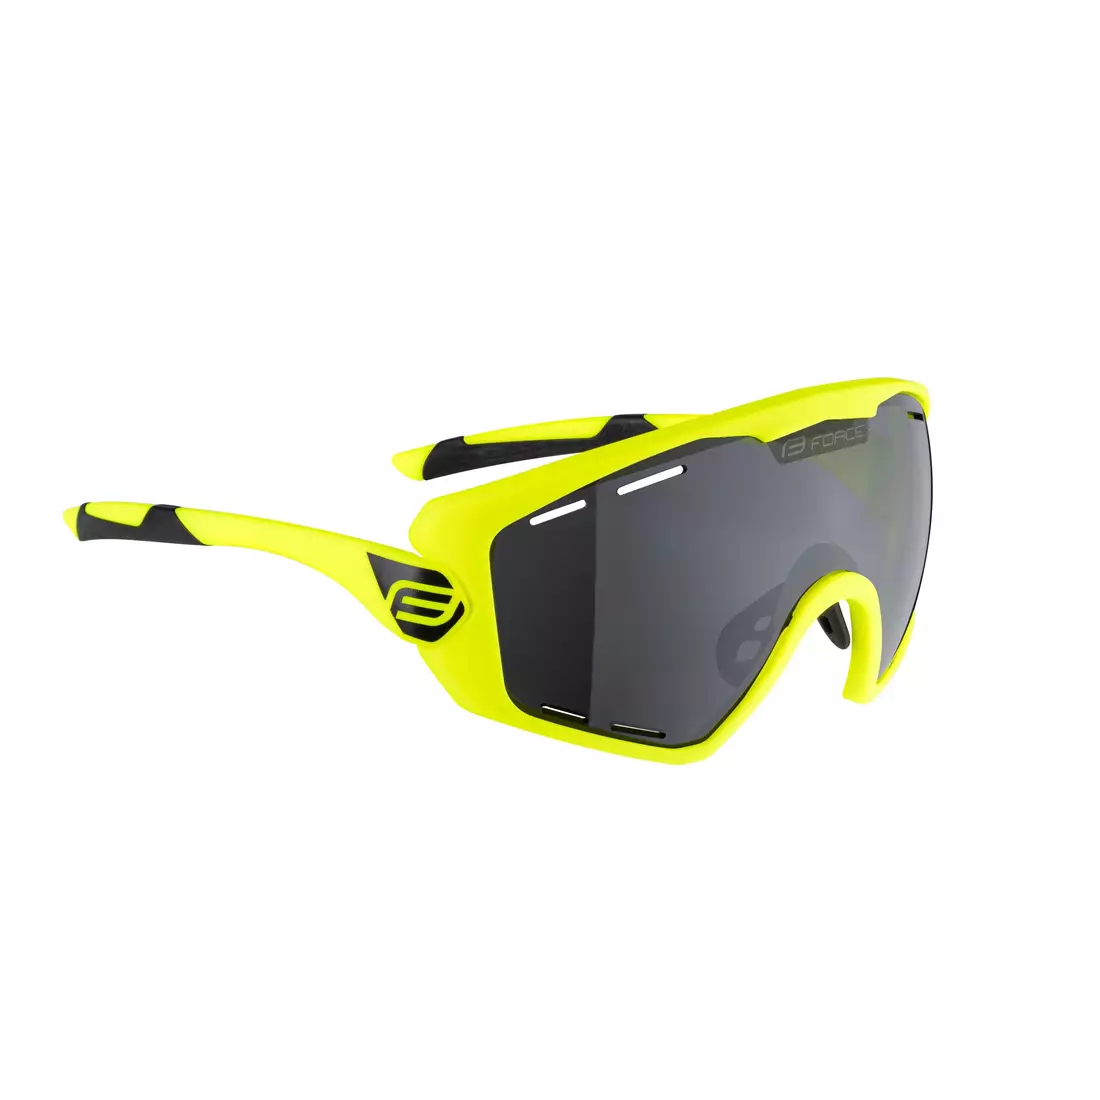 FORCE cycling / sports glasses OMBRO PLUS fluo mat, 91121